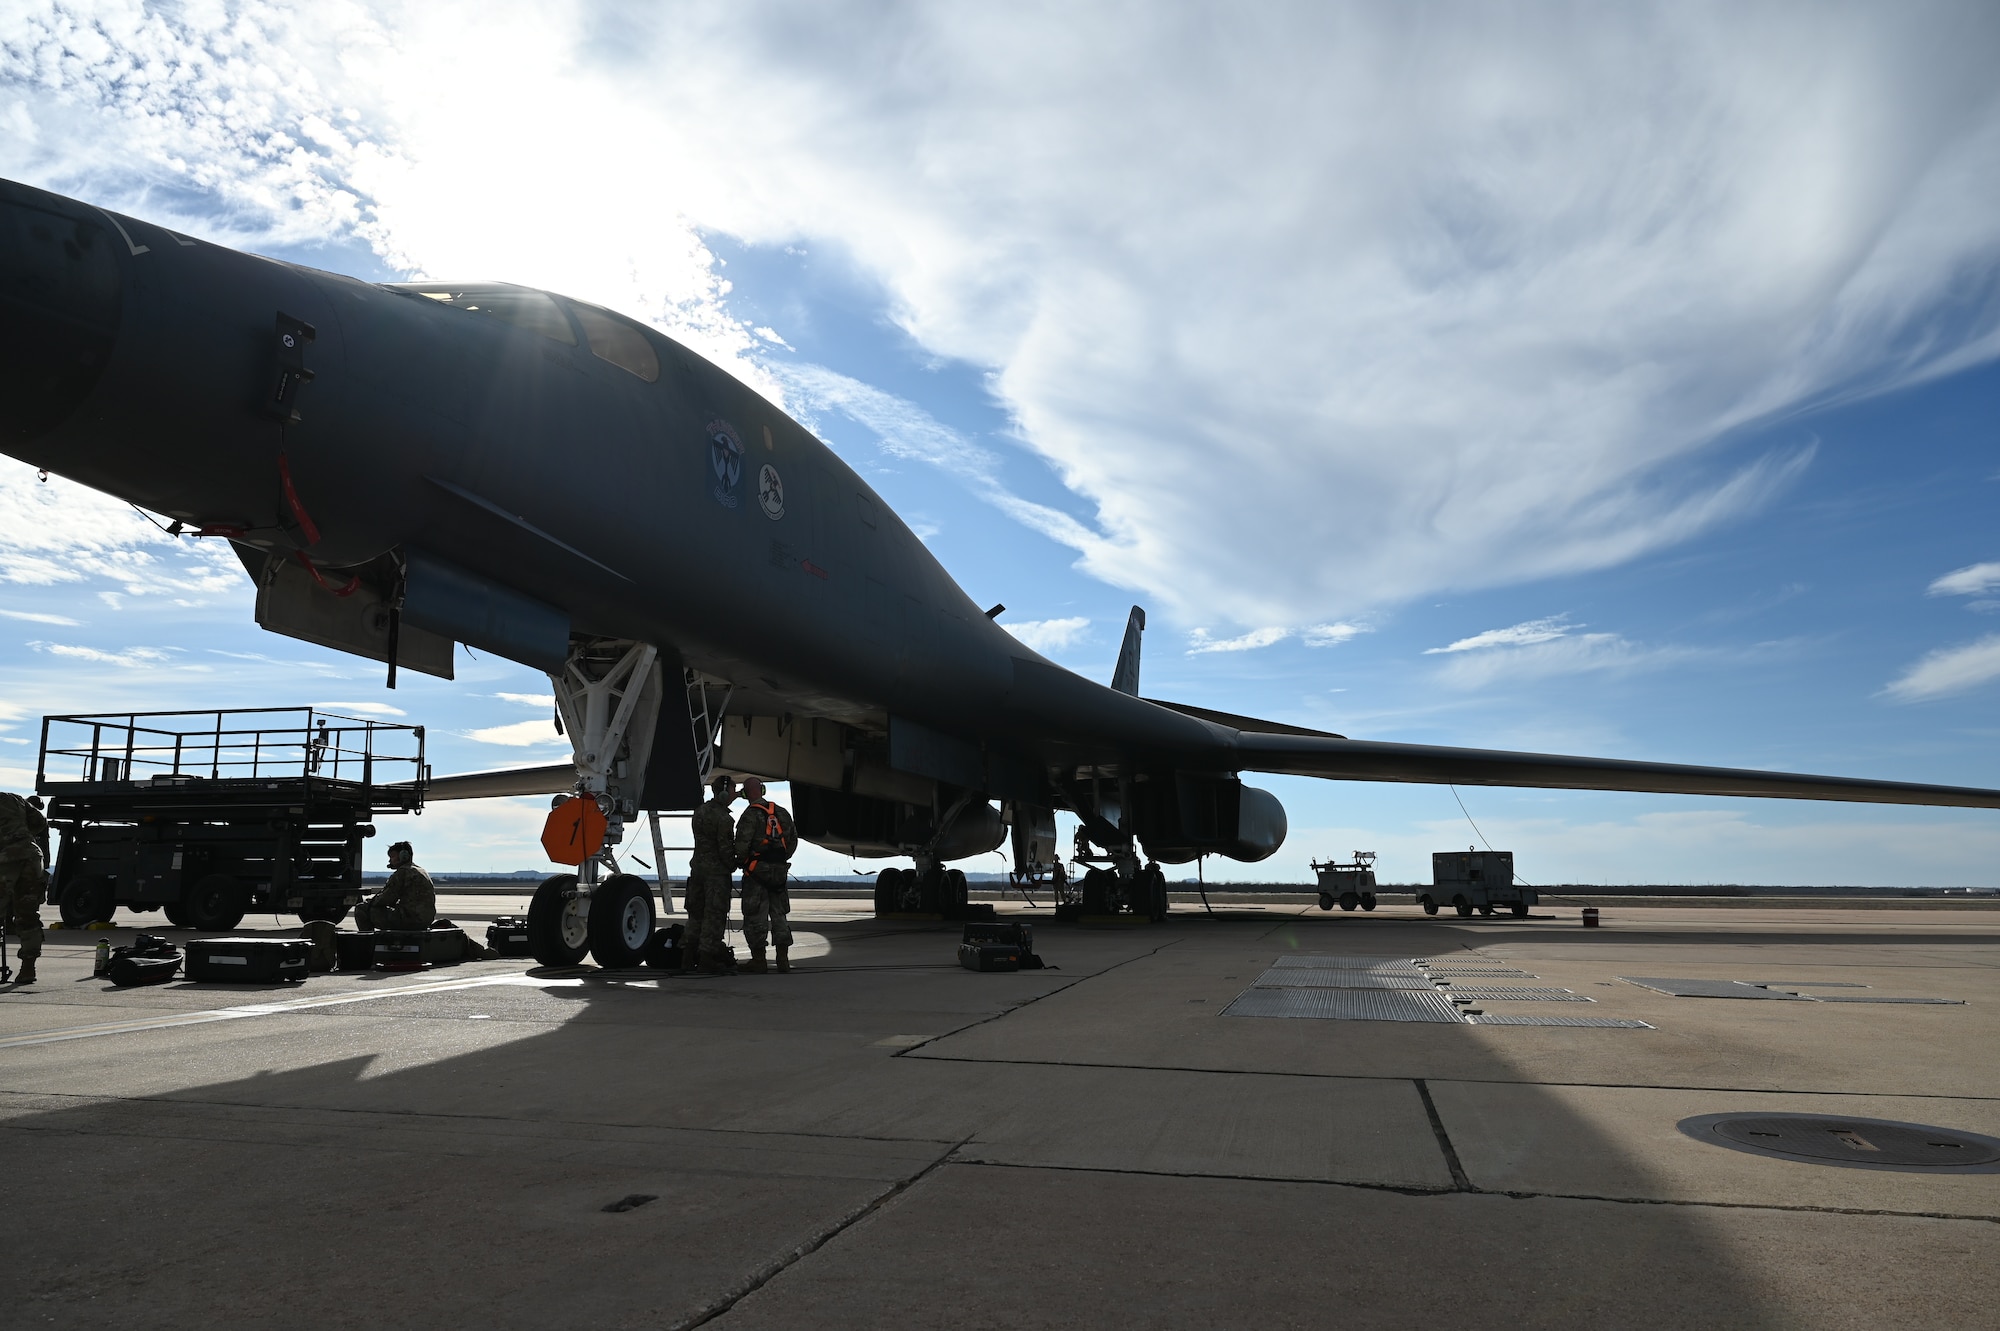 Airmen from the 28th Maintenance Group, Ellsworth Air Force Base, South Dakota, and the 7th MXG perform preflight maintenance on a B-1B Lancer on the flightline at Dyess AFB, Texas, Feb. 1, 2024. Ellsworth Air Force Base B-1Bs recently launched from Dyess Air Force Base to support U.S. Central Command priorities, validating the United States Air Force capability to provide precision, long-range strike anytime, anywhere. (U.S. Air Force photo by Staff Sgt. Holly Cook)